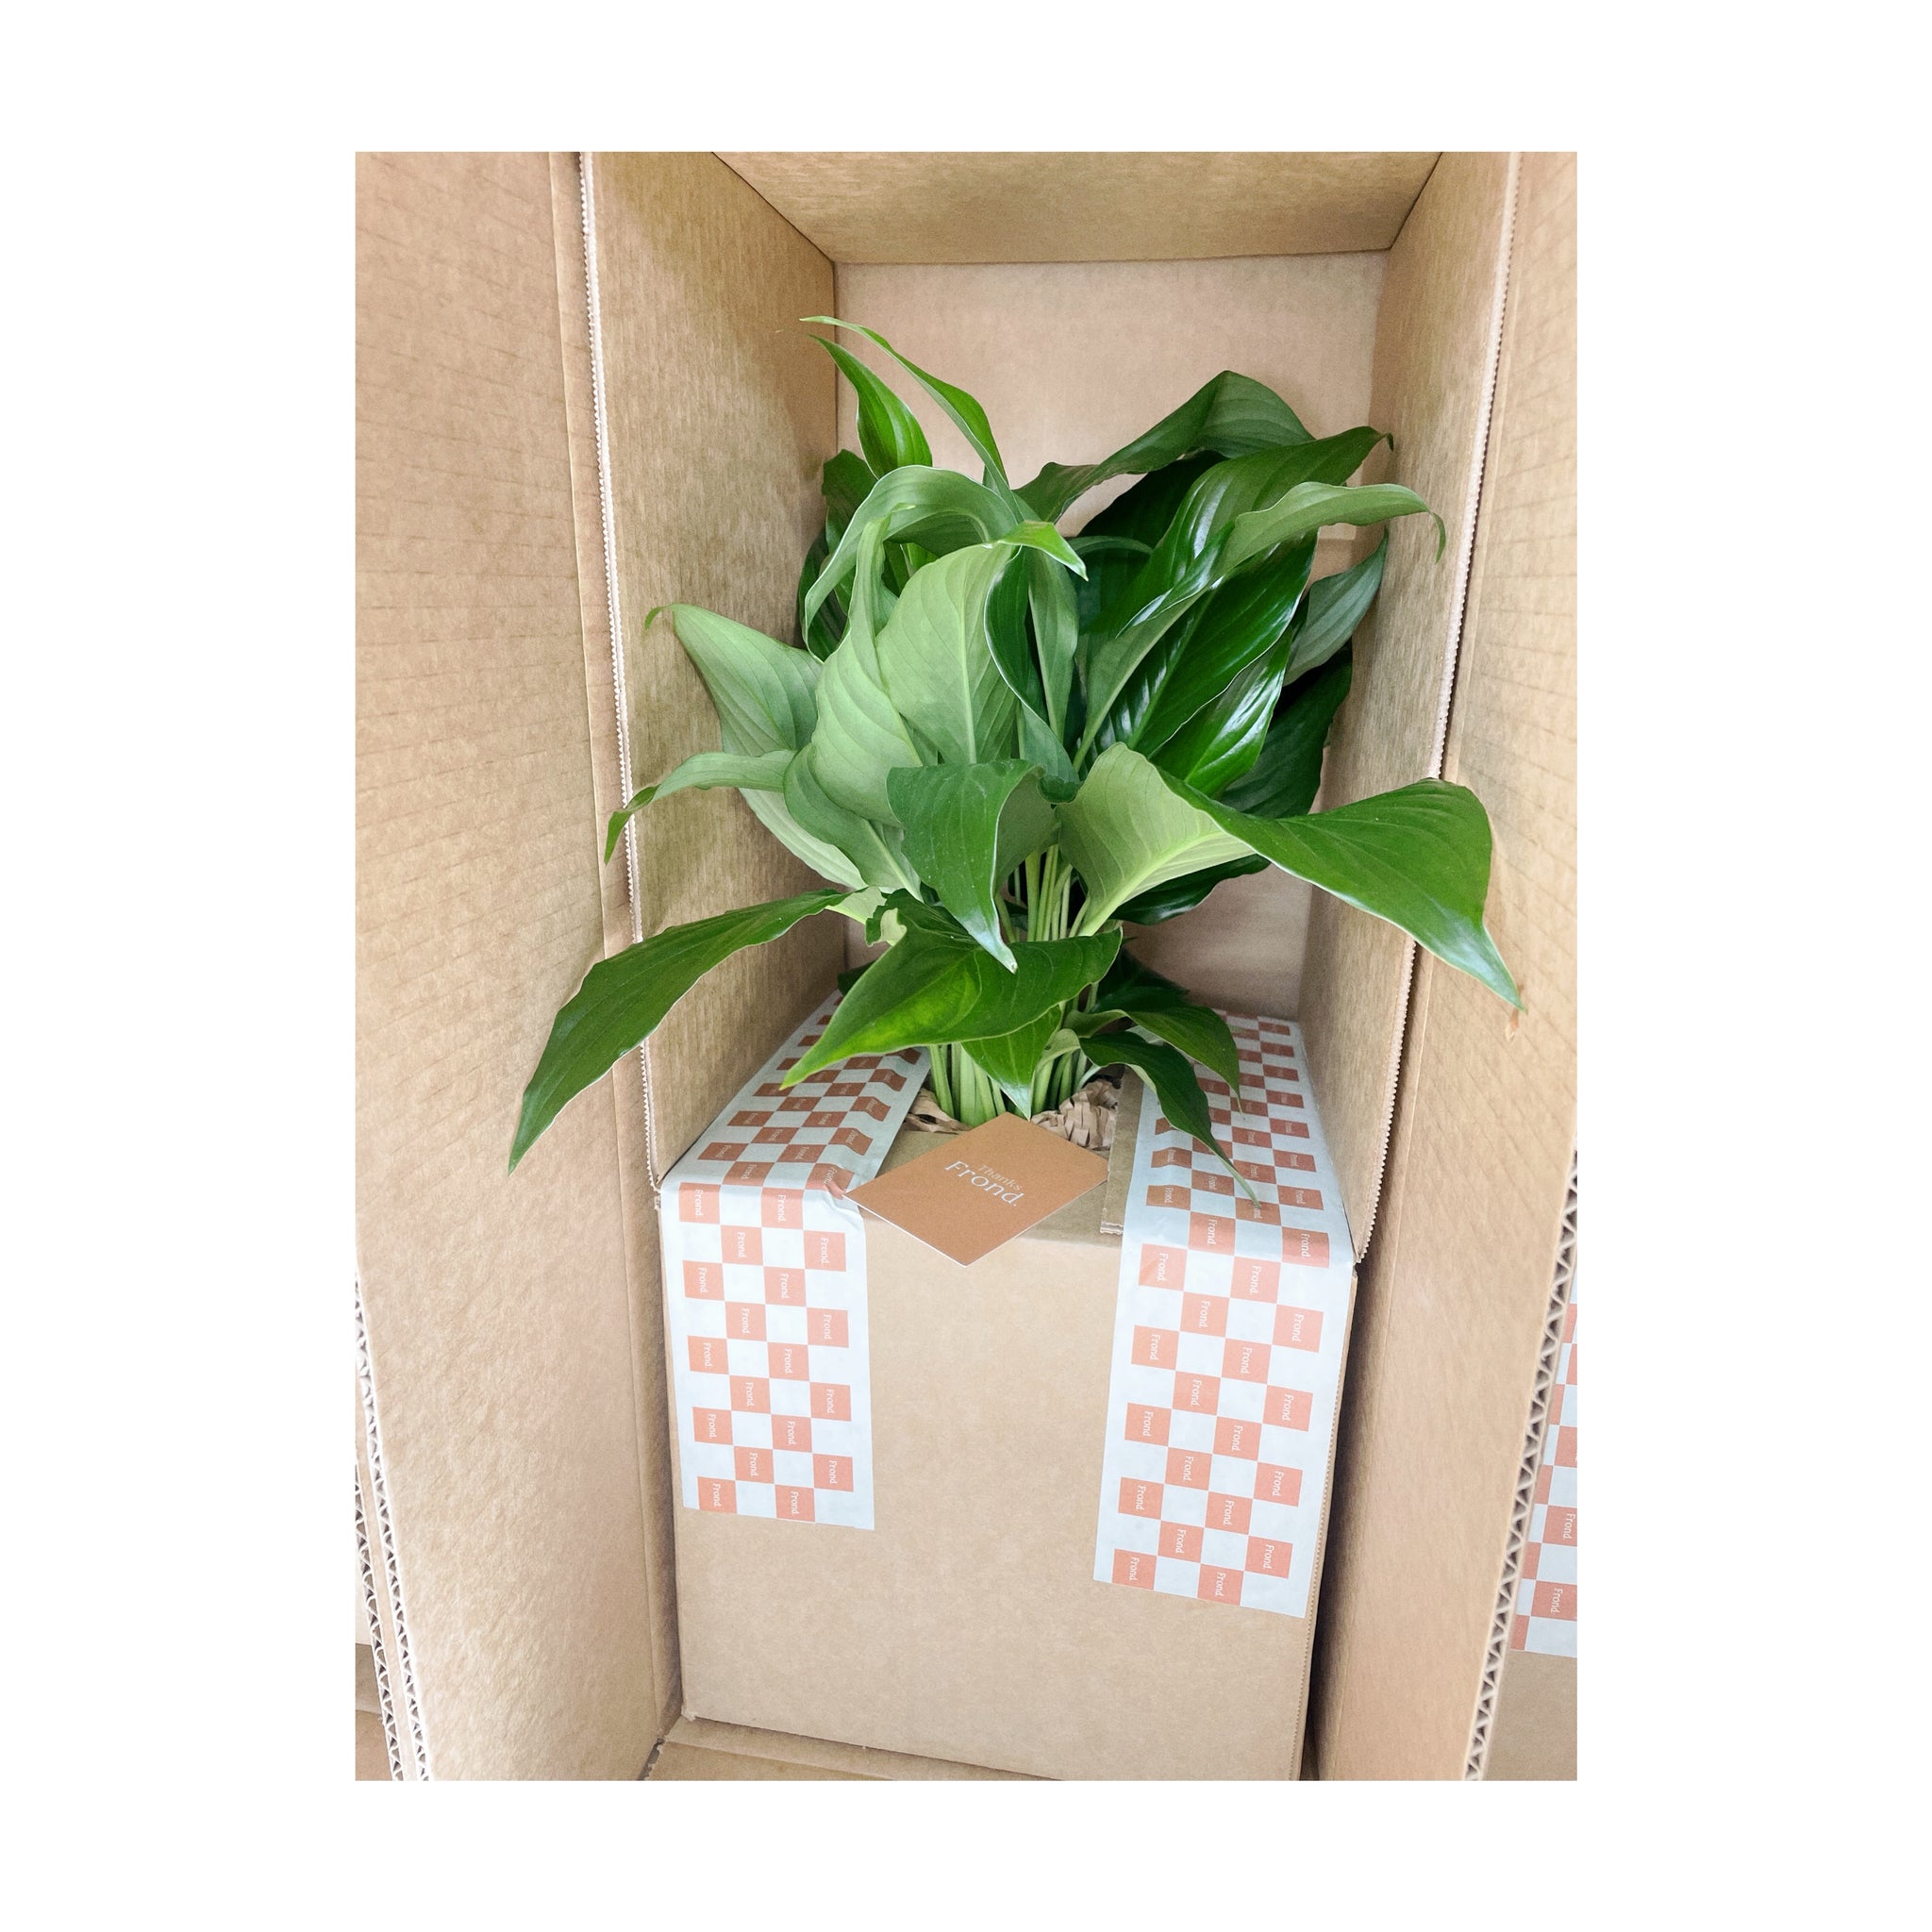 Peace Lily Plant Gloucester, VA Florist: Smith's Florist & Gift Shoppe |  Local Flower Delivery Gloucester, 23061